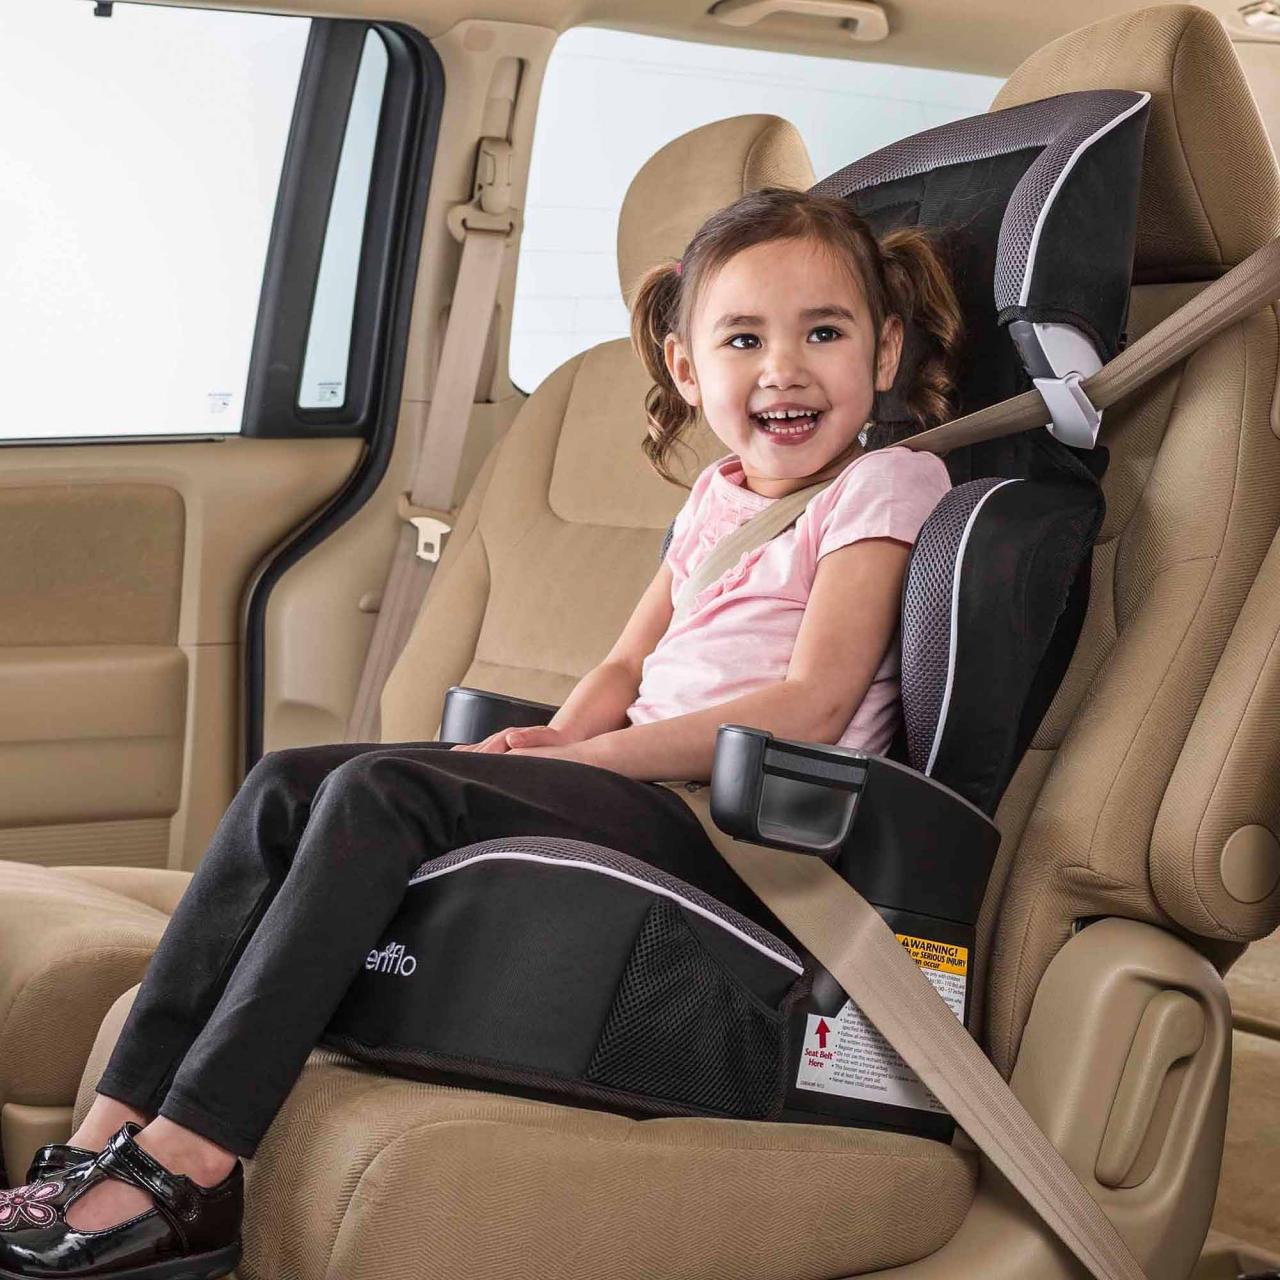 Booster Car Seat review: Evenflo Big Kid - Baby Bargains